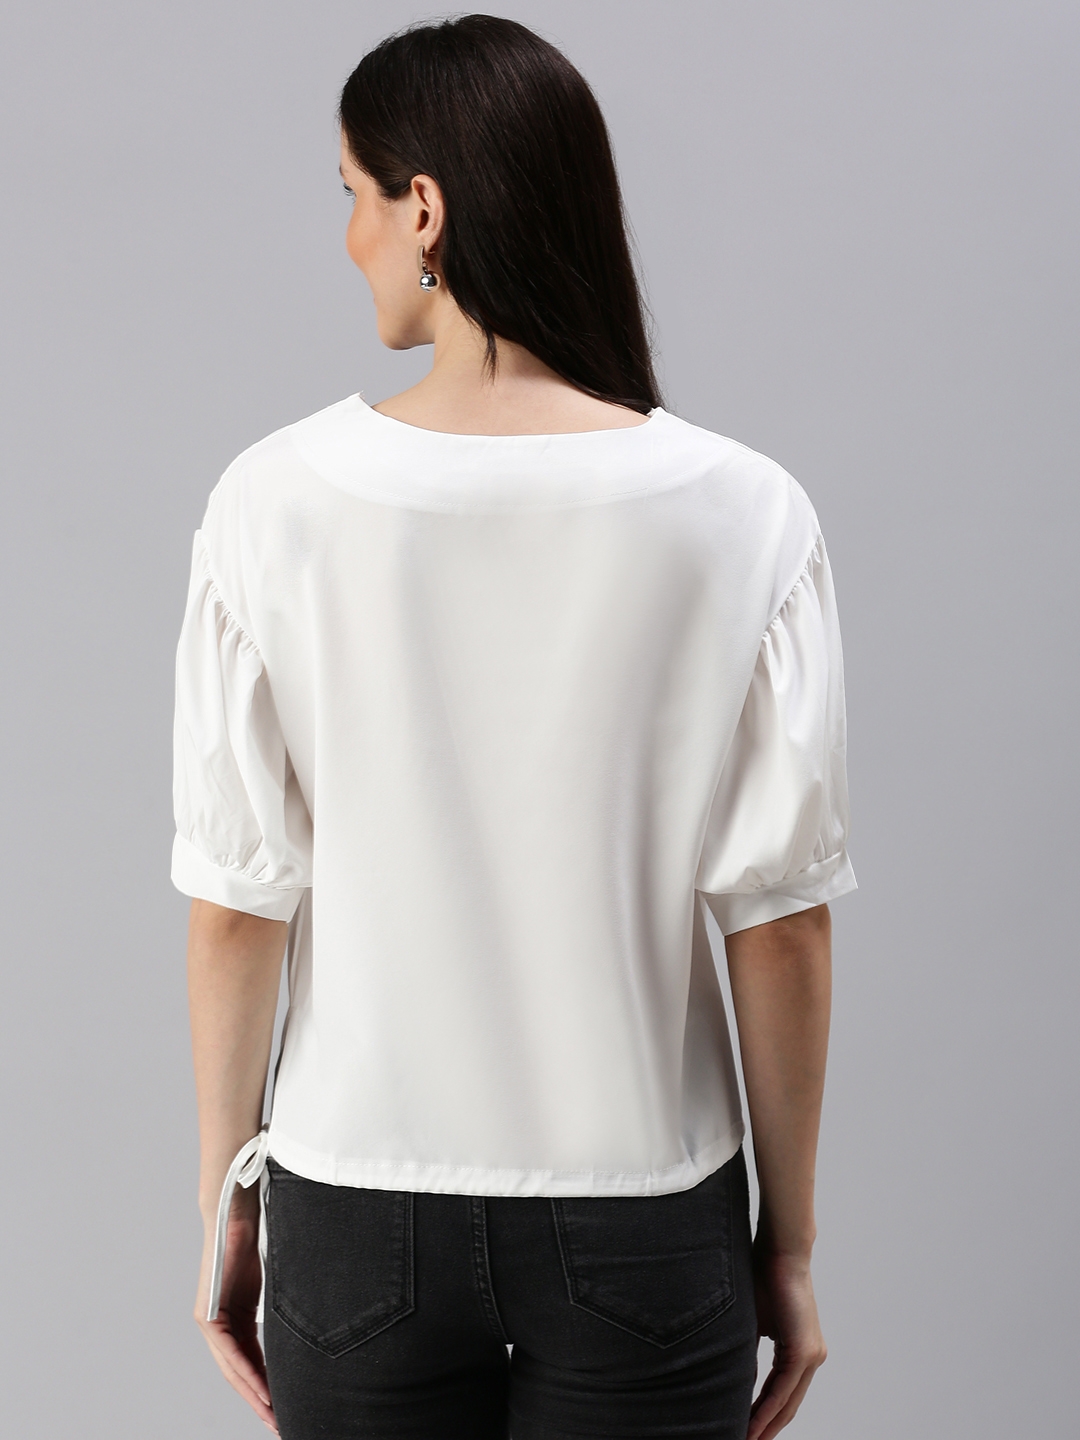 Women's White Polyester Solid Tops